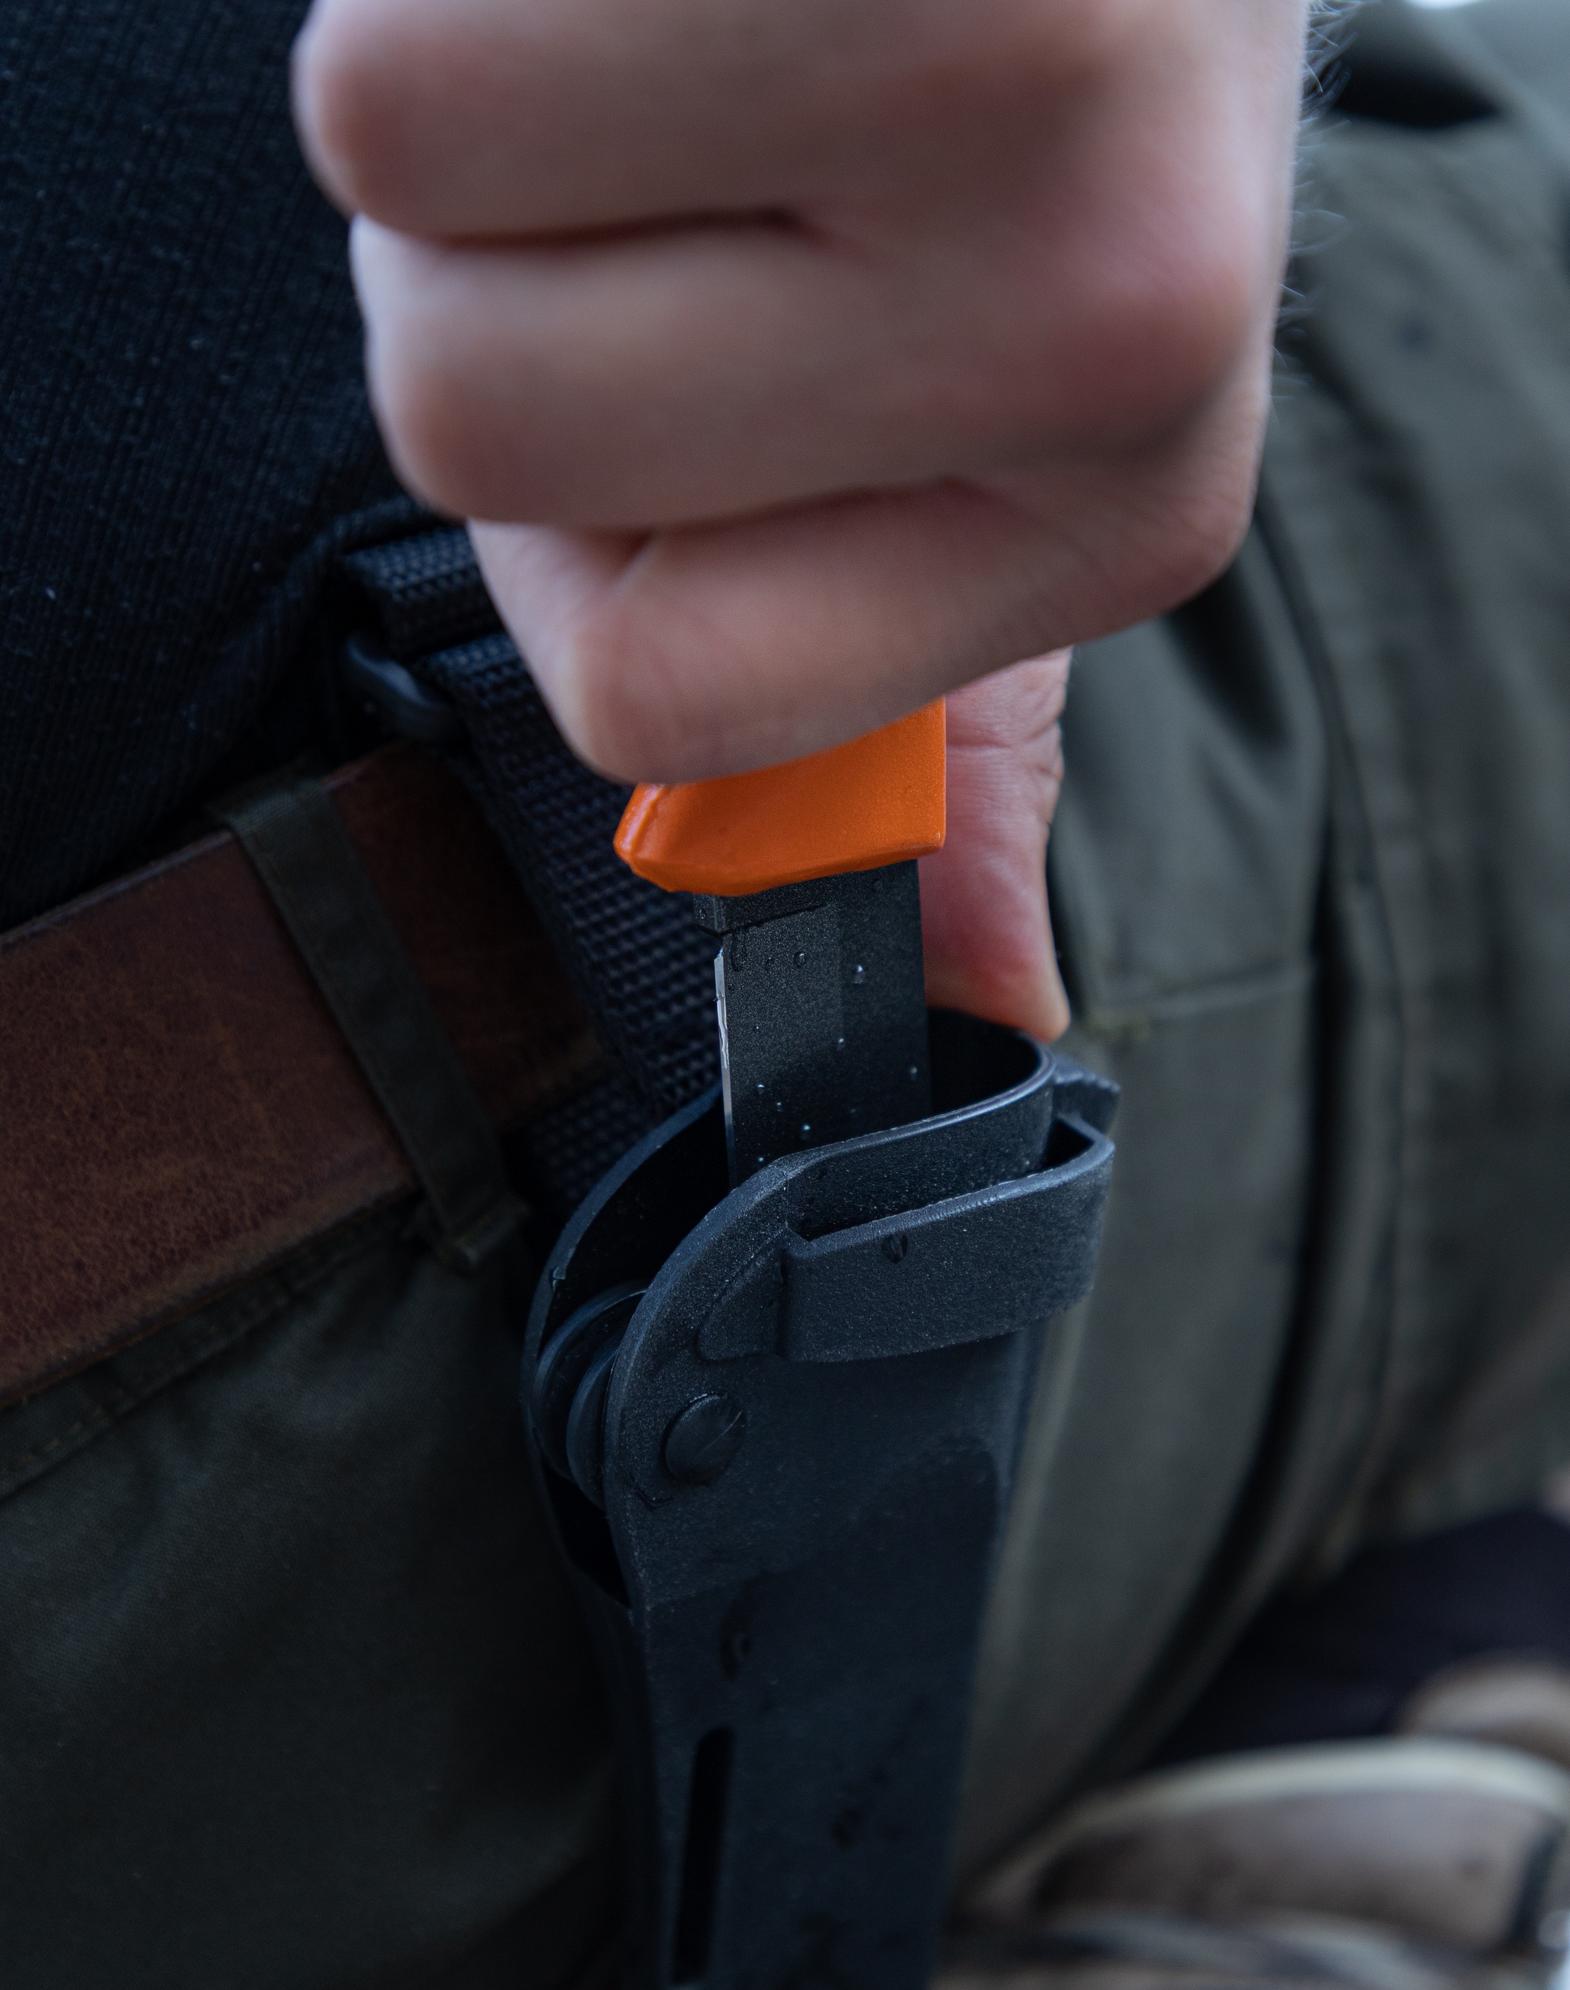 Innovative sheath - composite plastic, roll mechanism. Easy to carry in MOLLE systems. Color options available.